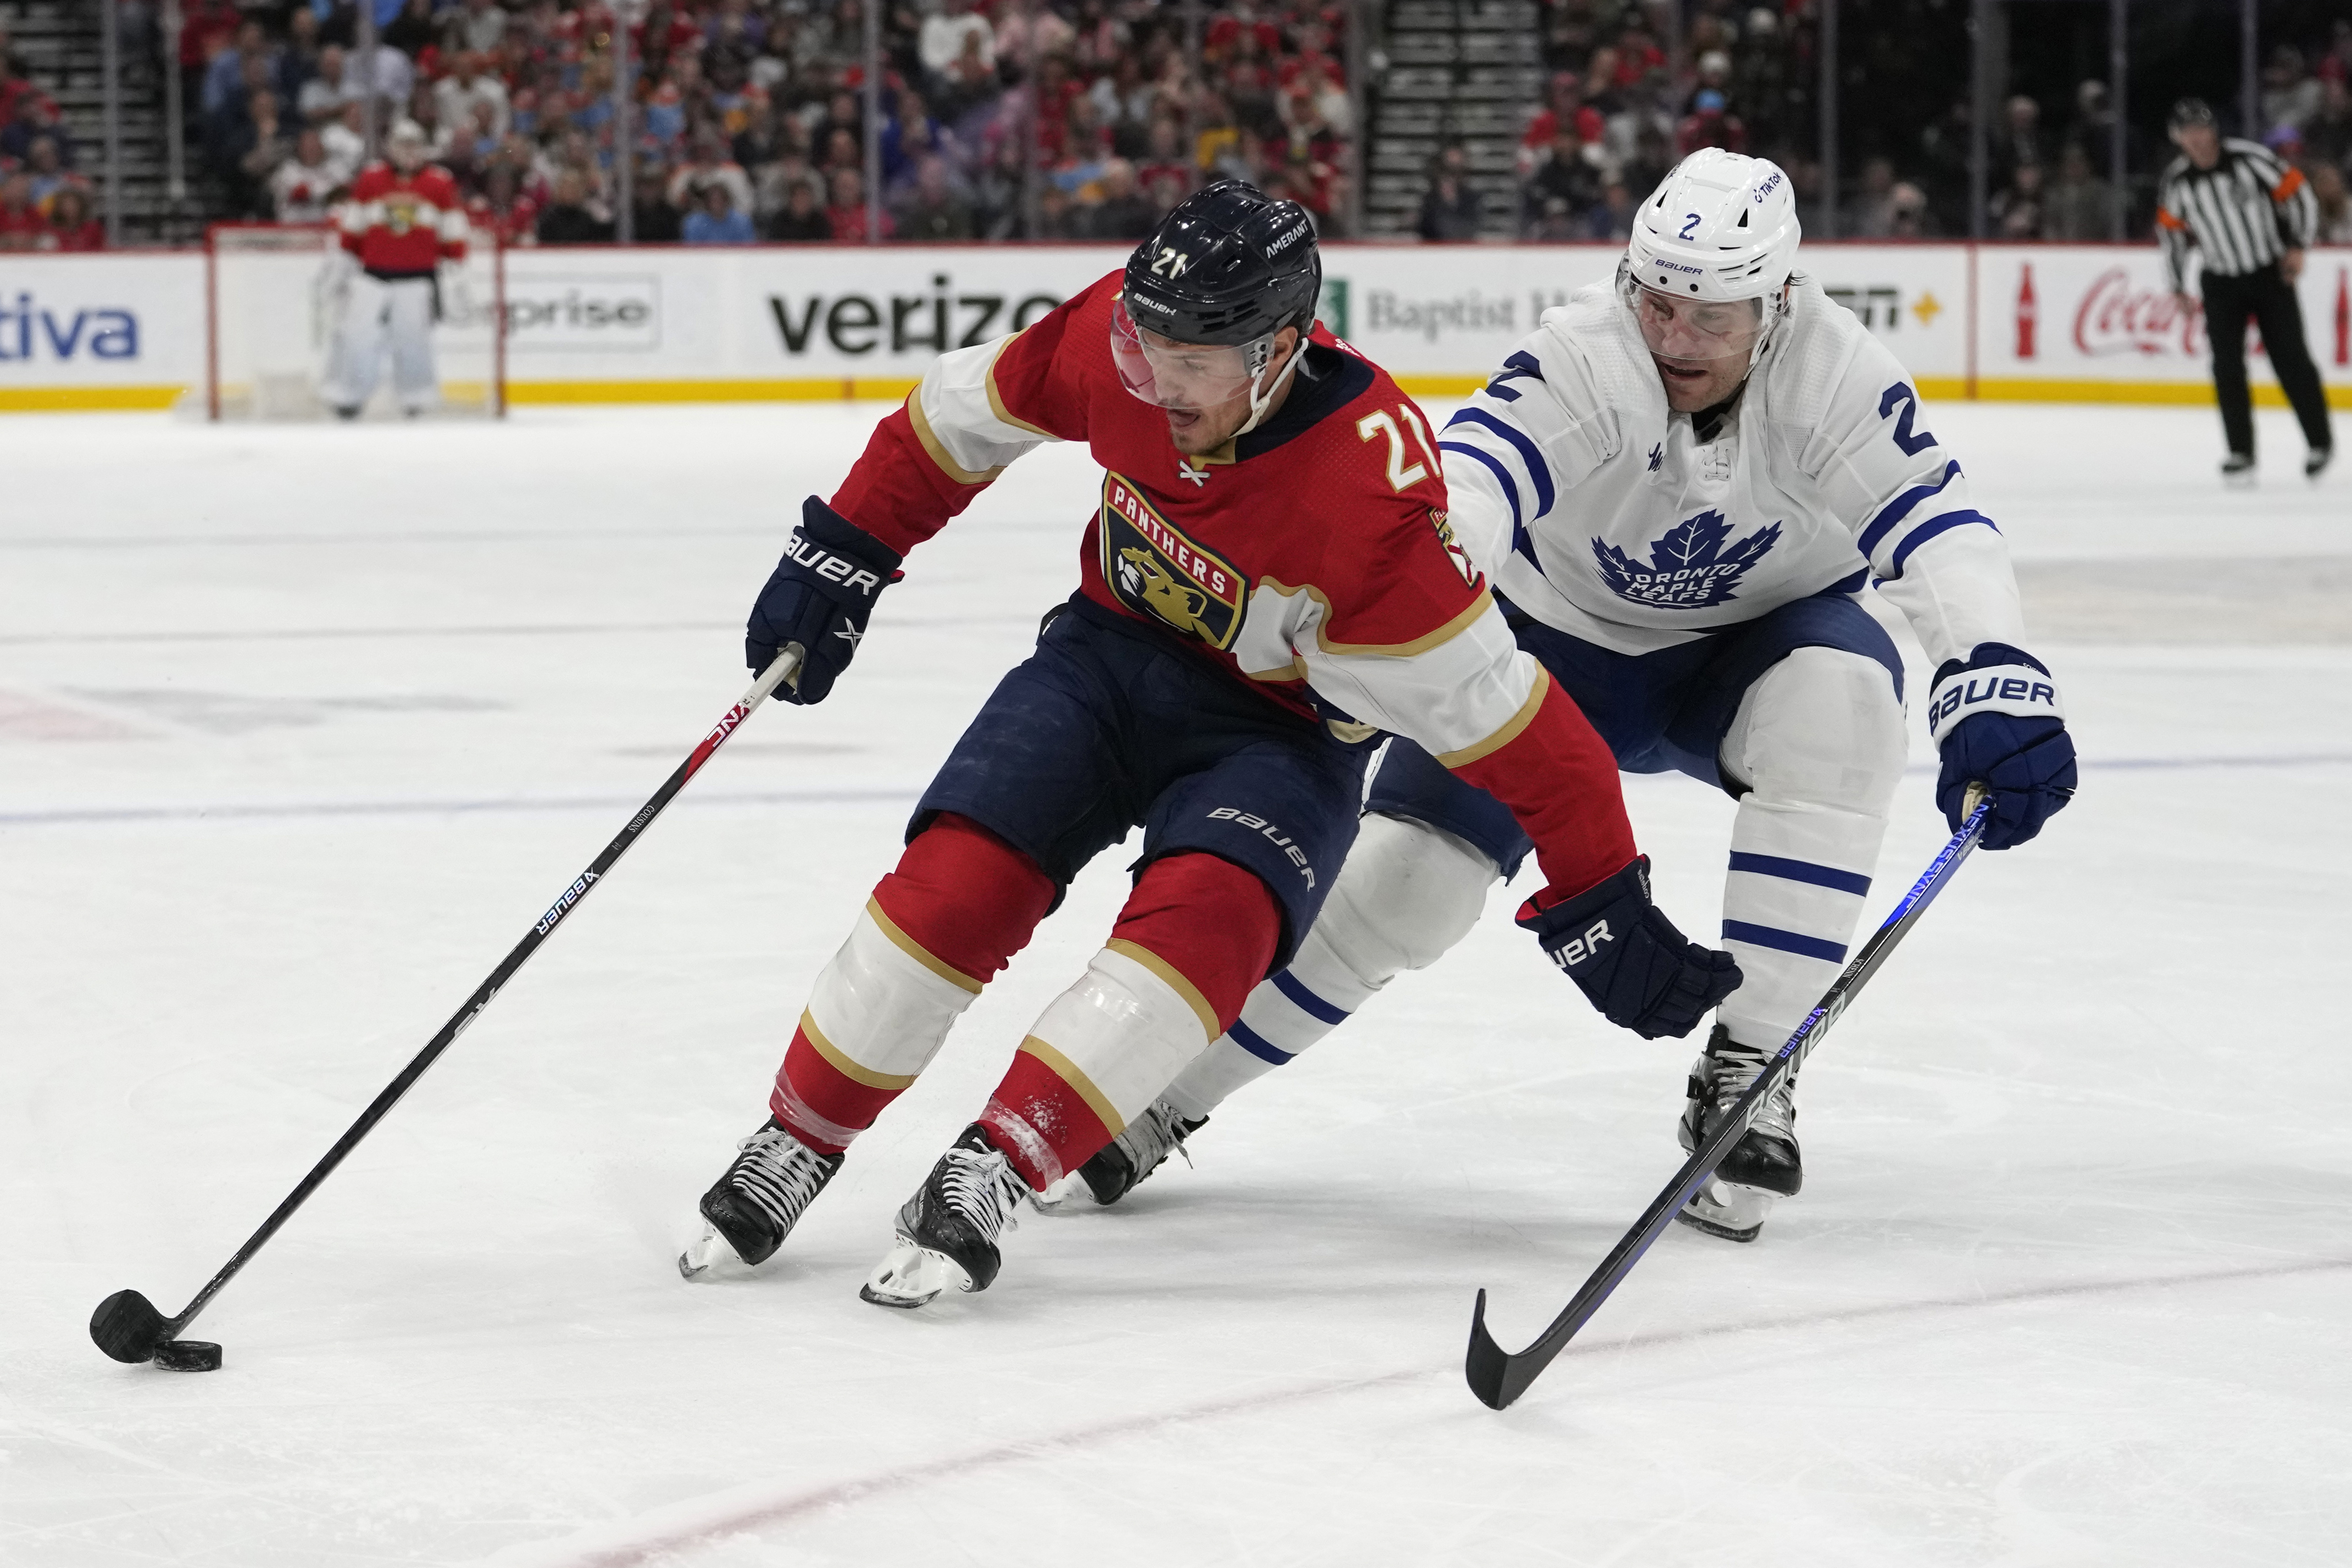 Maple Leafs vs. Panthers 2023 Stanley Cup Playoffs preview and